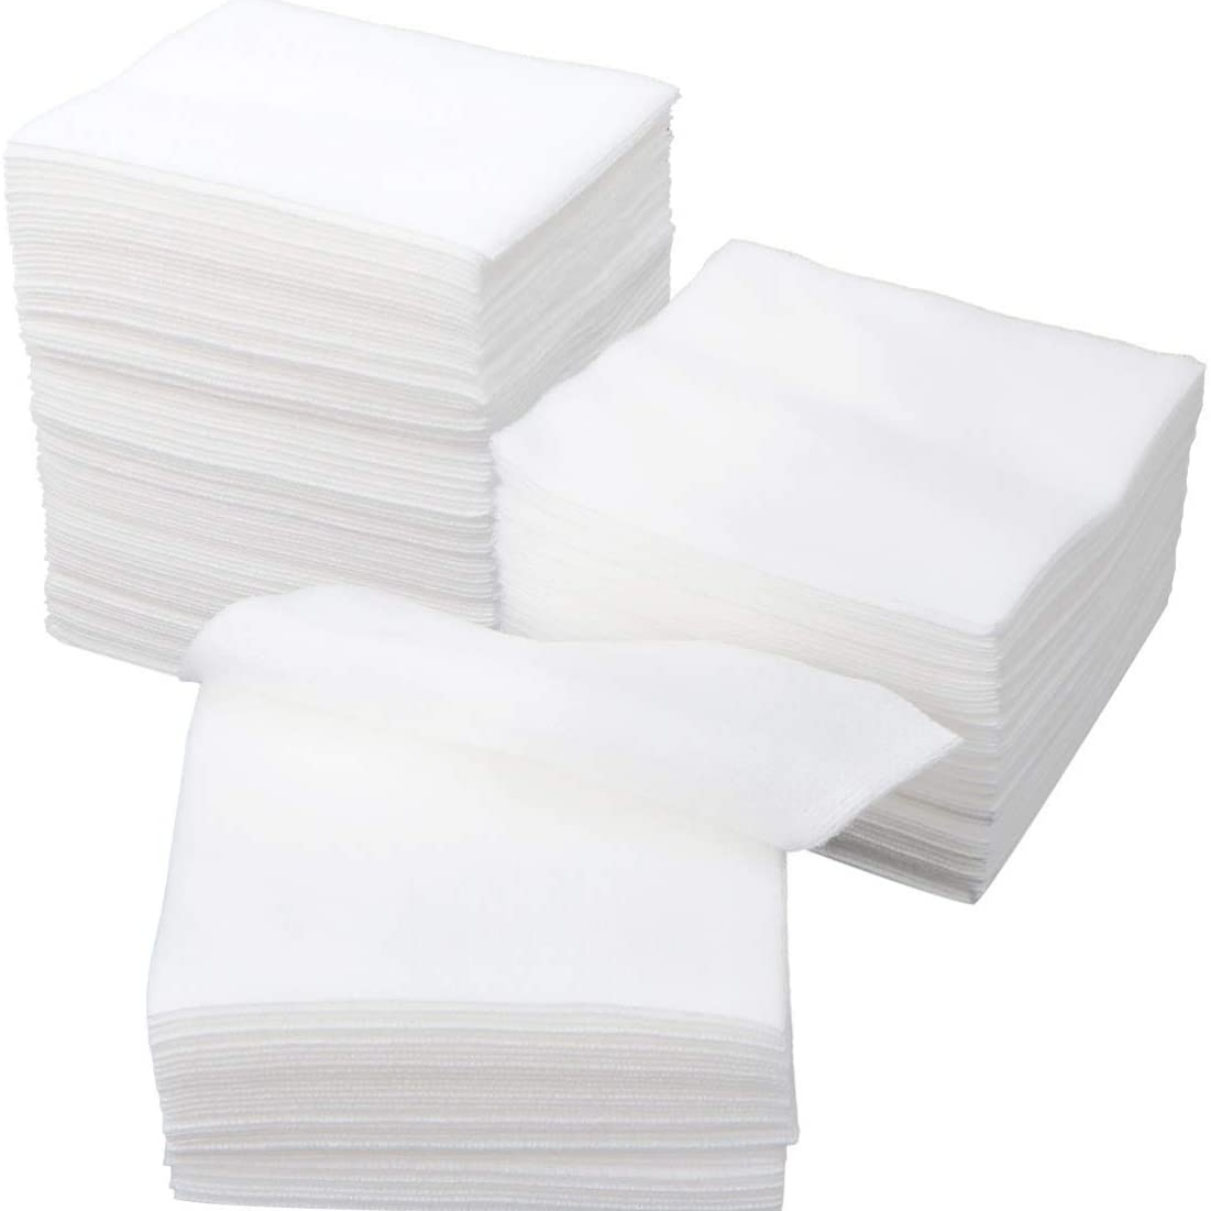 Disposable Medical Sterilize 4ply white Non Woven Gauze Sponges for Hospital Use